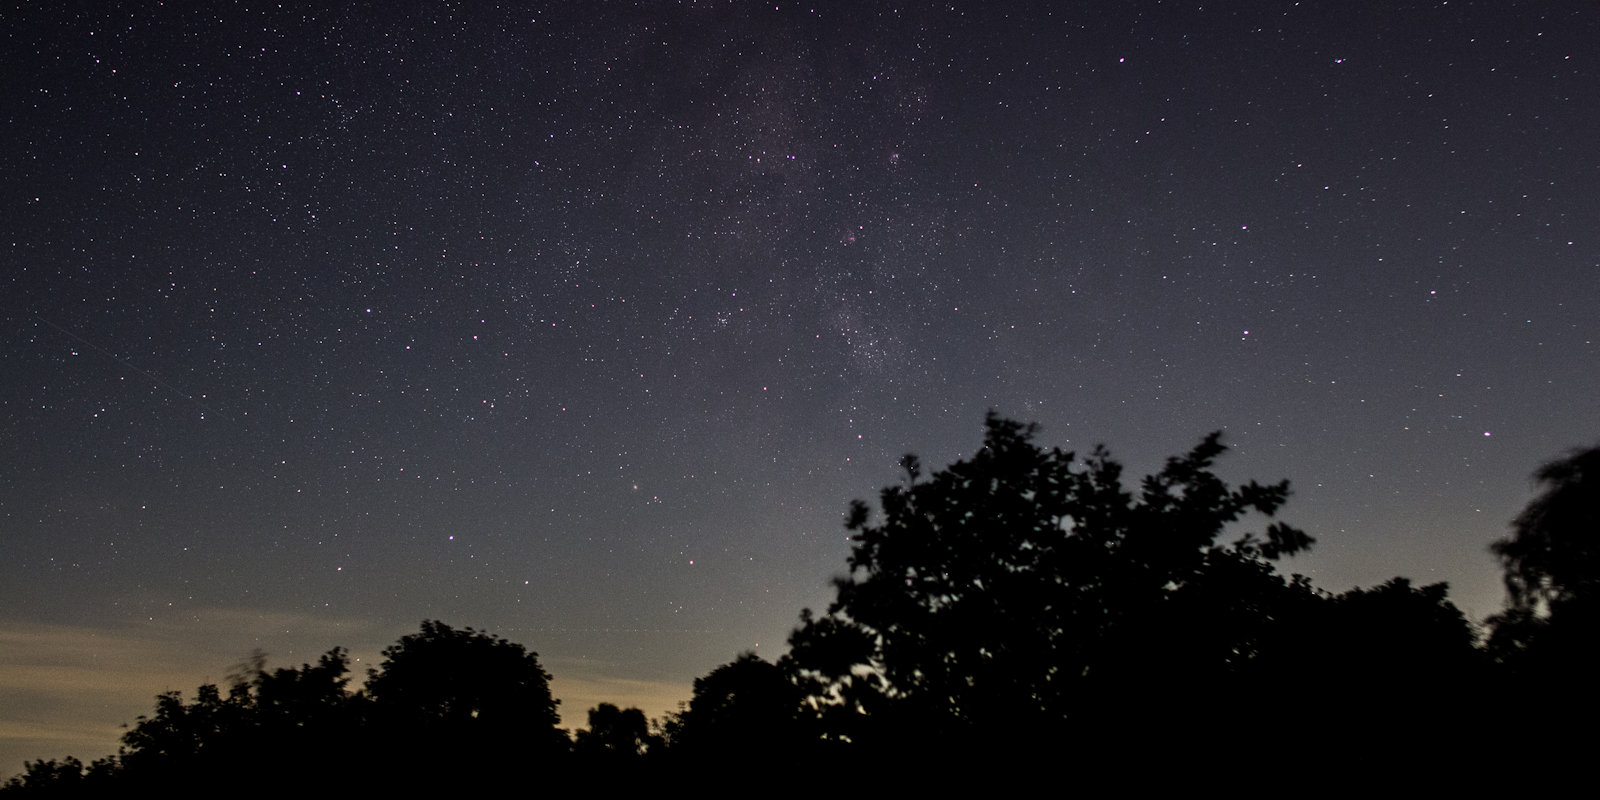 North Norfolk Stargazing & Northern Lights Spotting | Our guide to star gazing in North Norfolk, home to wonderful dark skies. A wonderful place to stop & stare.